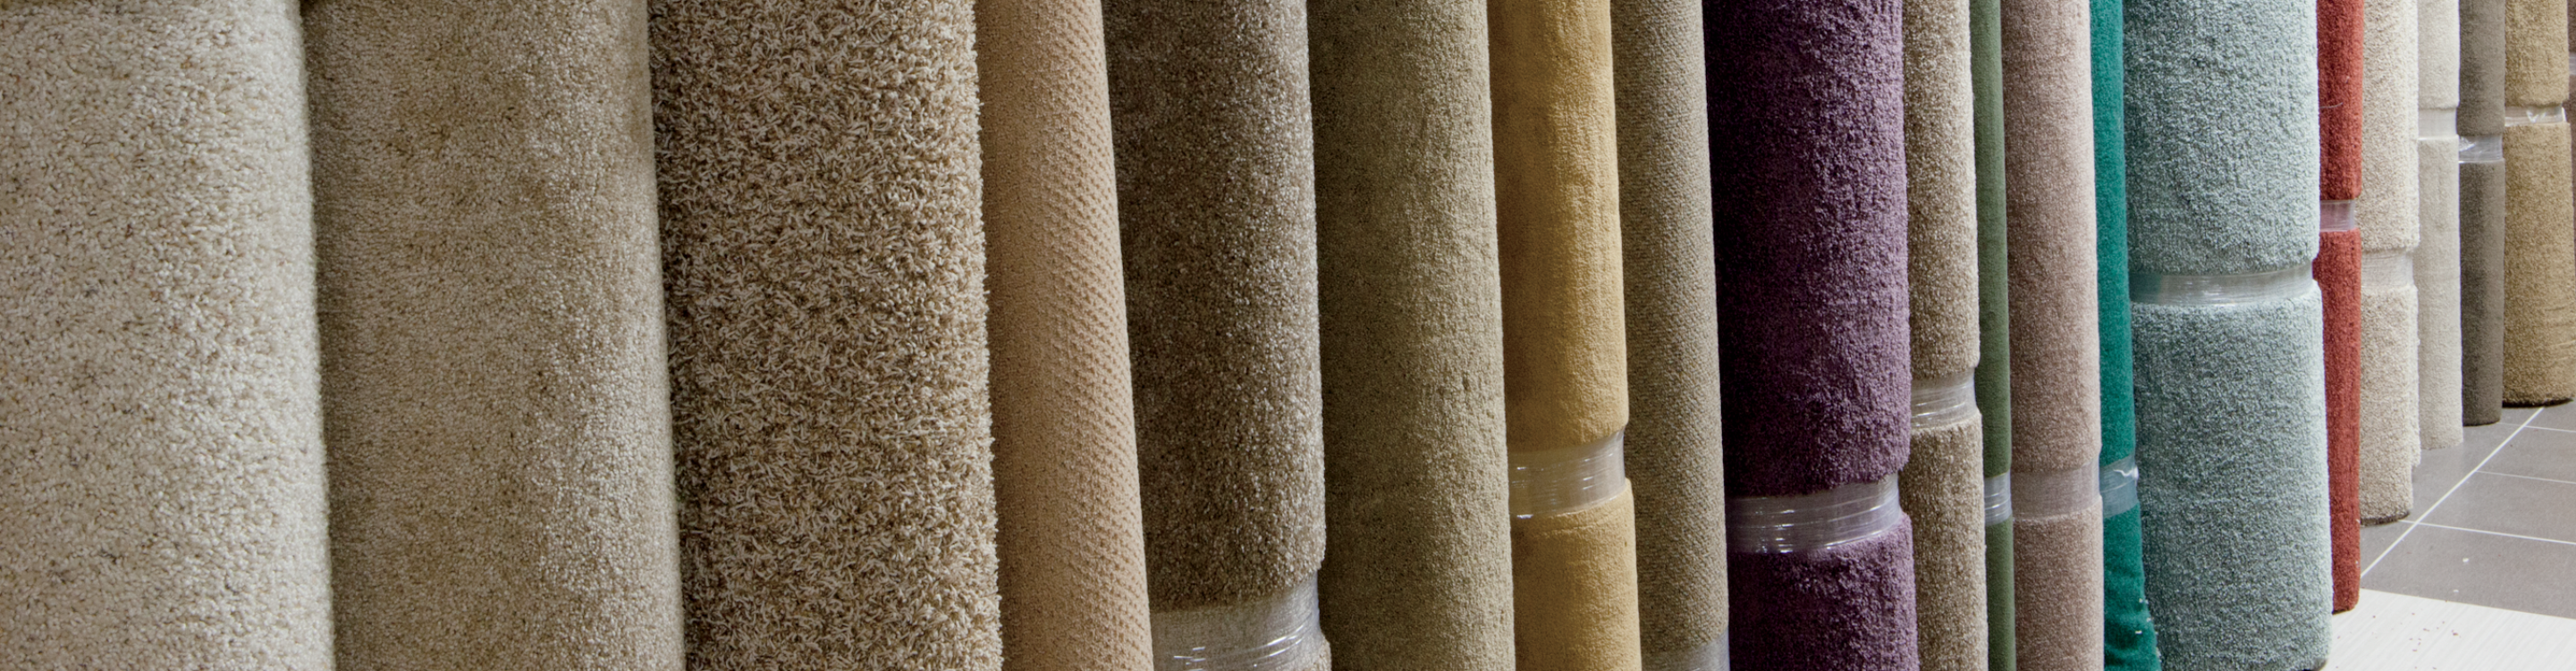 Carpet rolls, with prices remnant room entrance